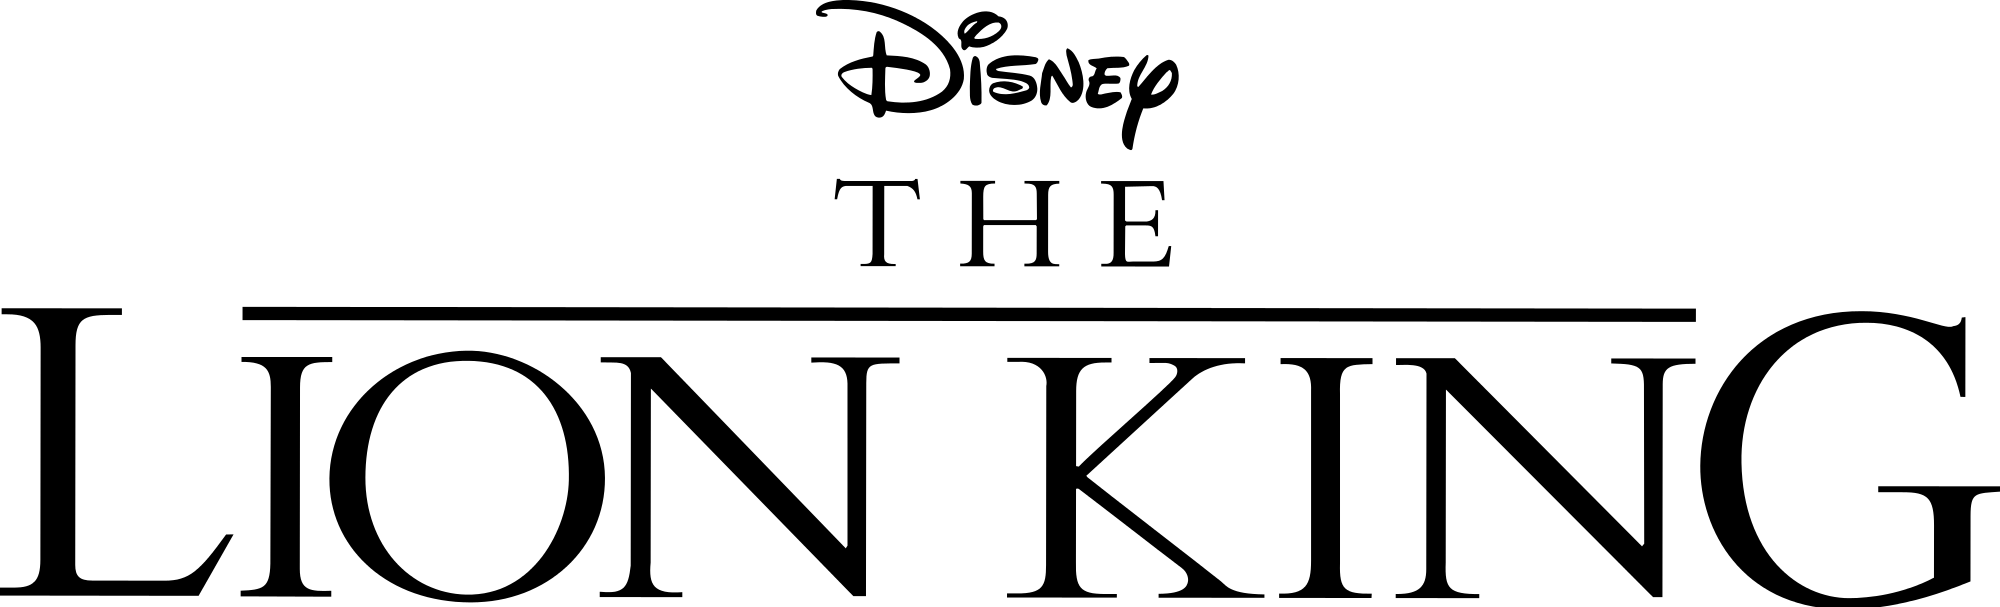 The Lion King Logo - File:The Lion King logo.svg - Wikimedia Commons